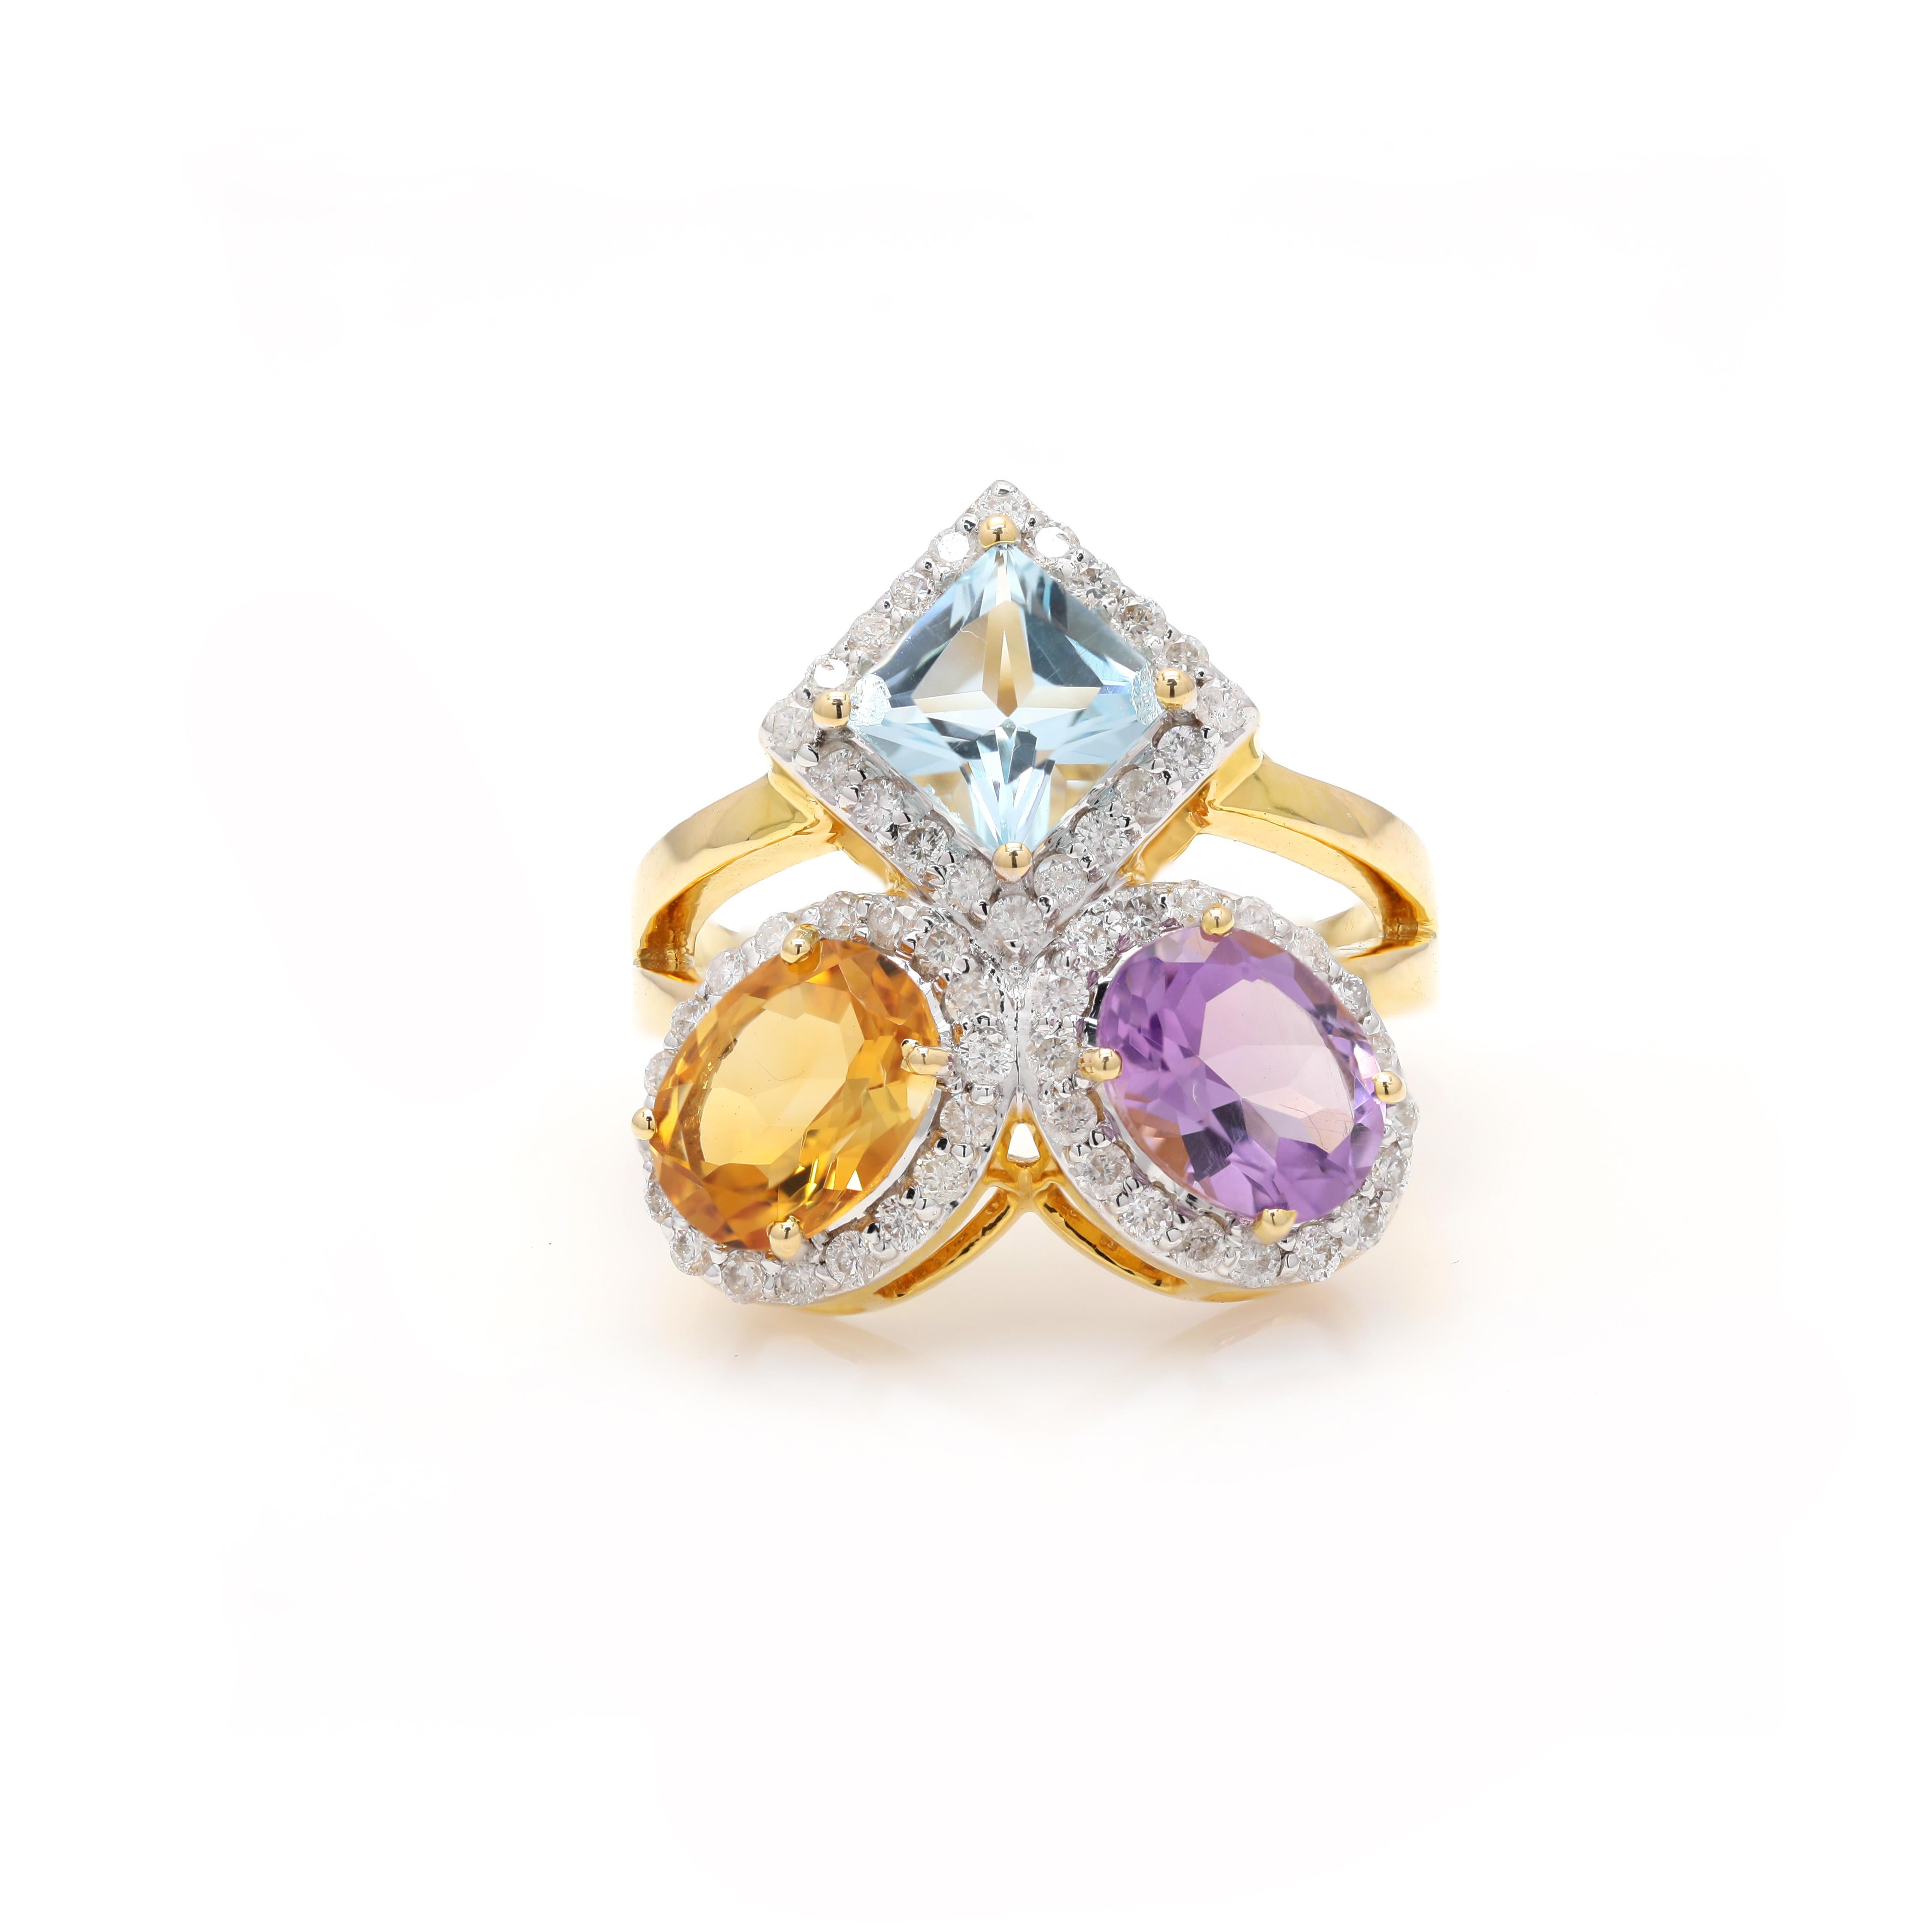 For Sale:  Statement 7.23ct Semi Precious Cocktail Ring in 18k Yellow Gold with Diamonds 3